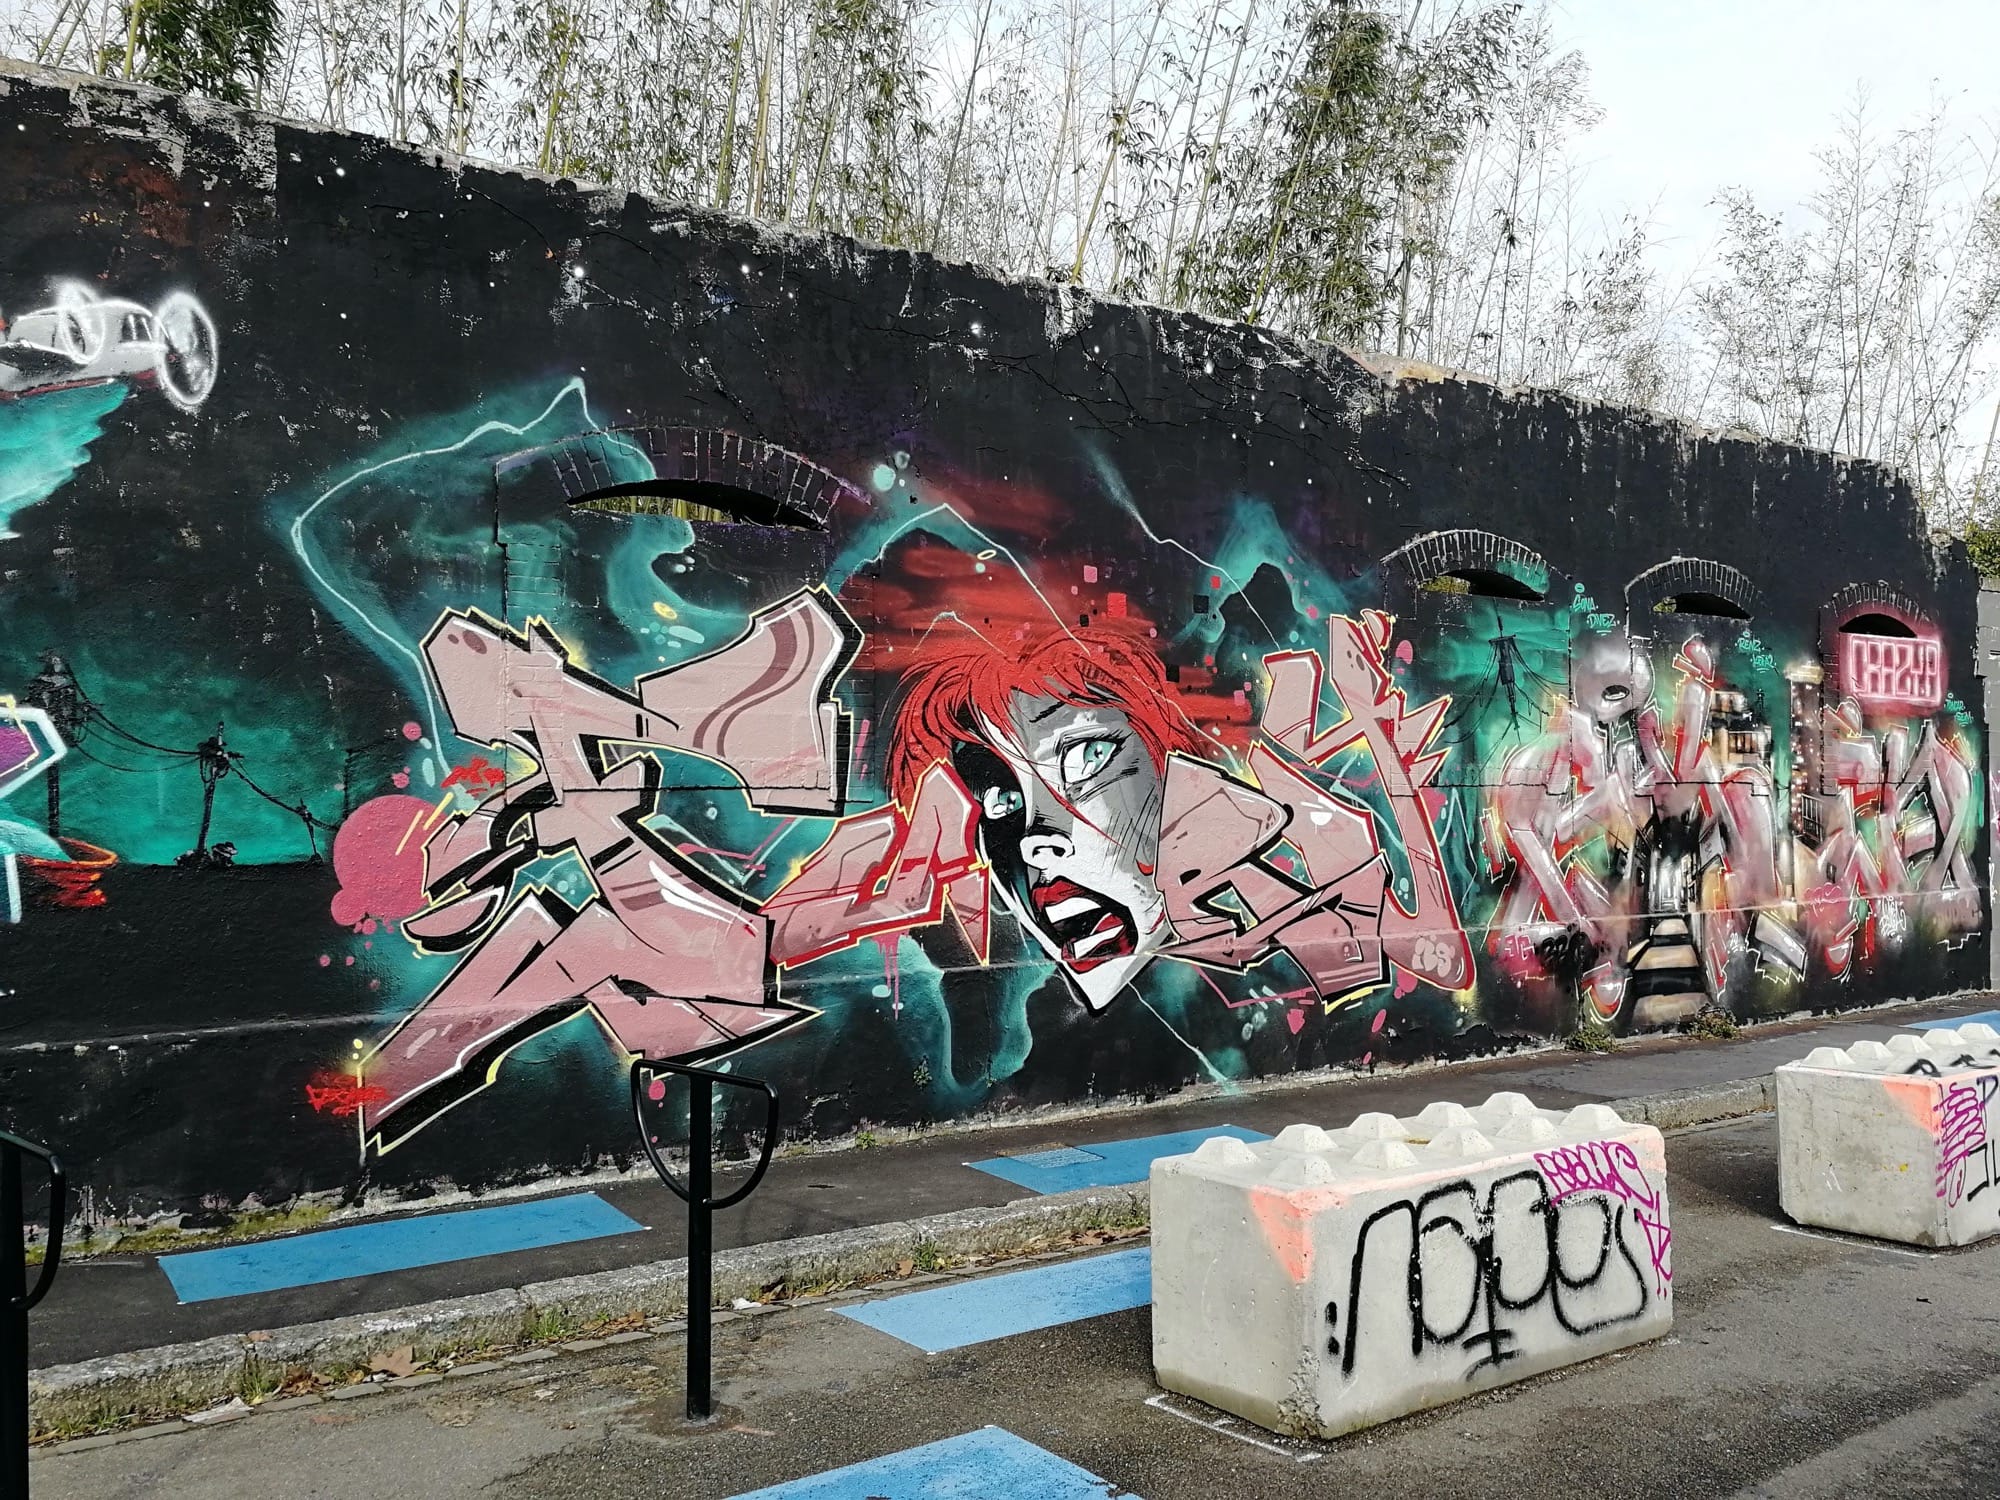 Graffiti 4025  captured by Rabot in Nantes France